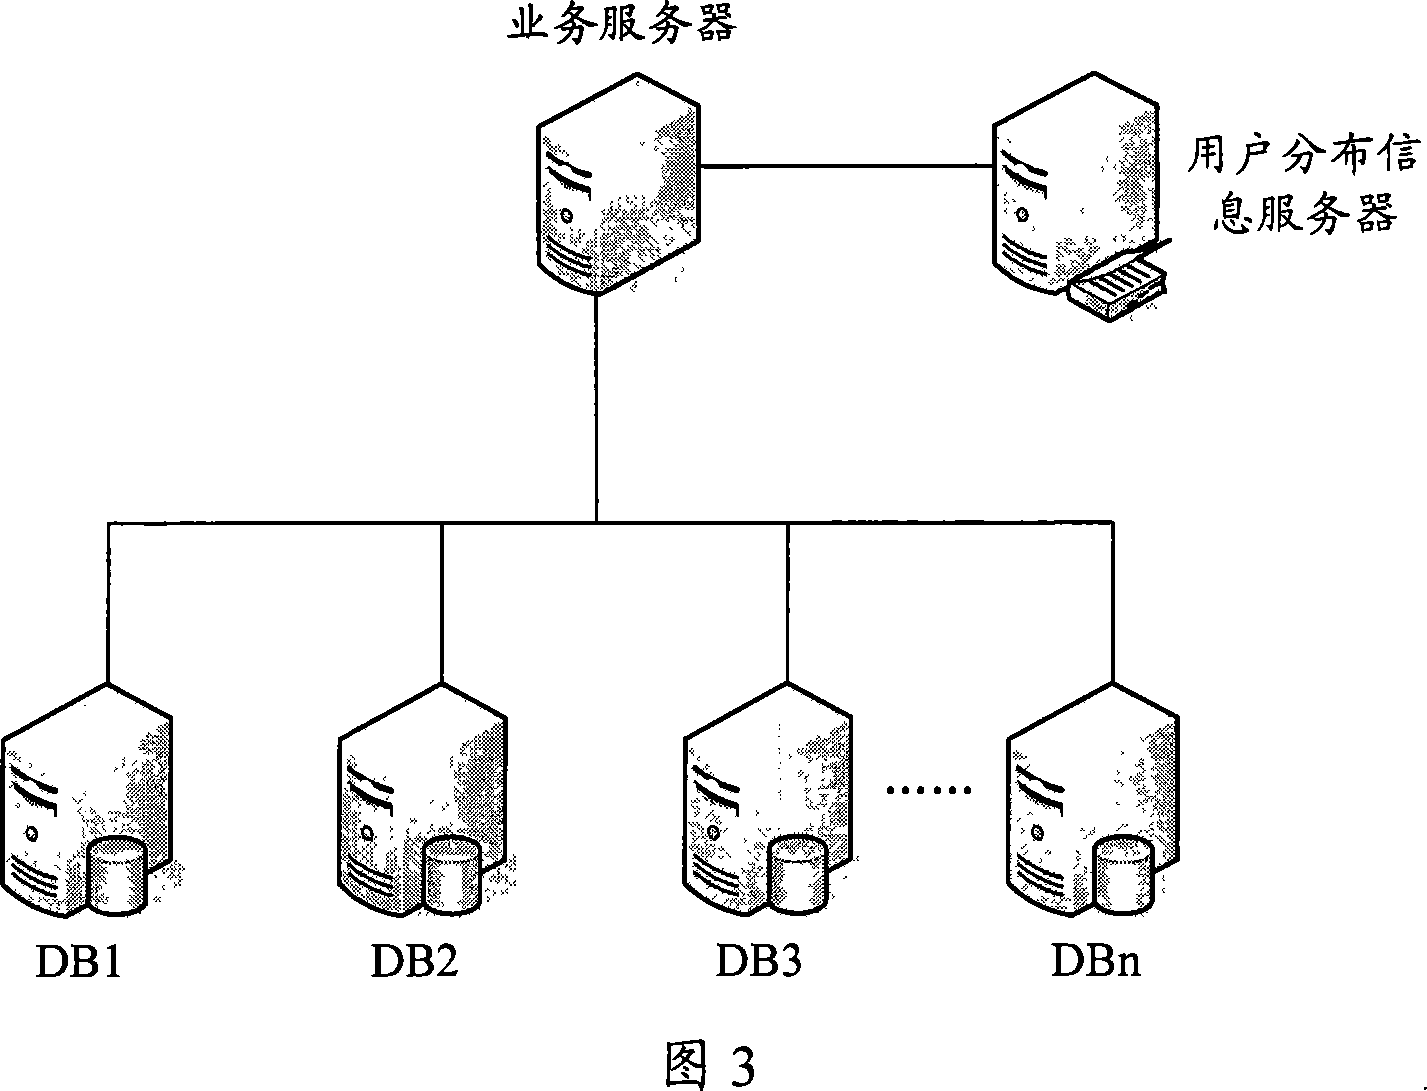 User distributing method, device and system for distributed database system